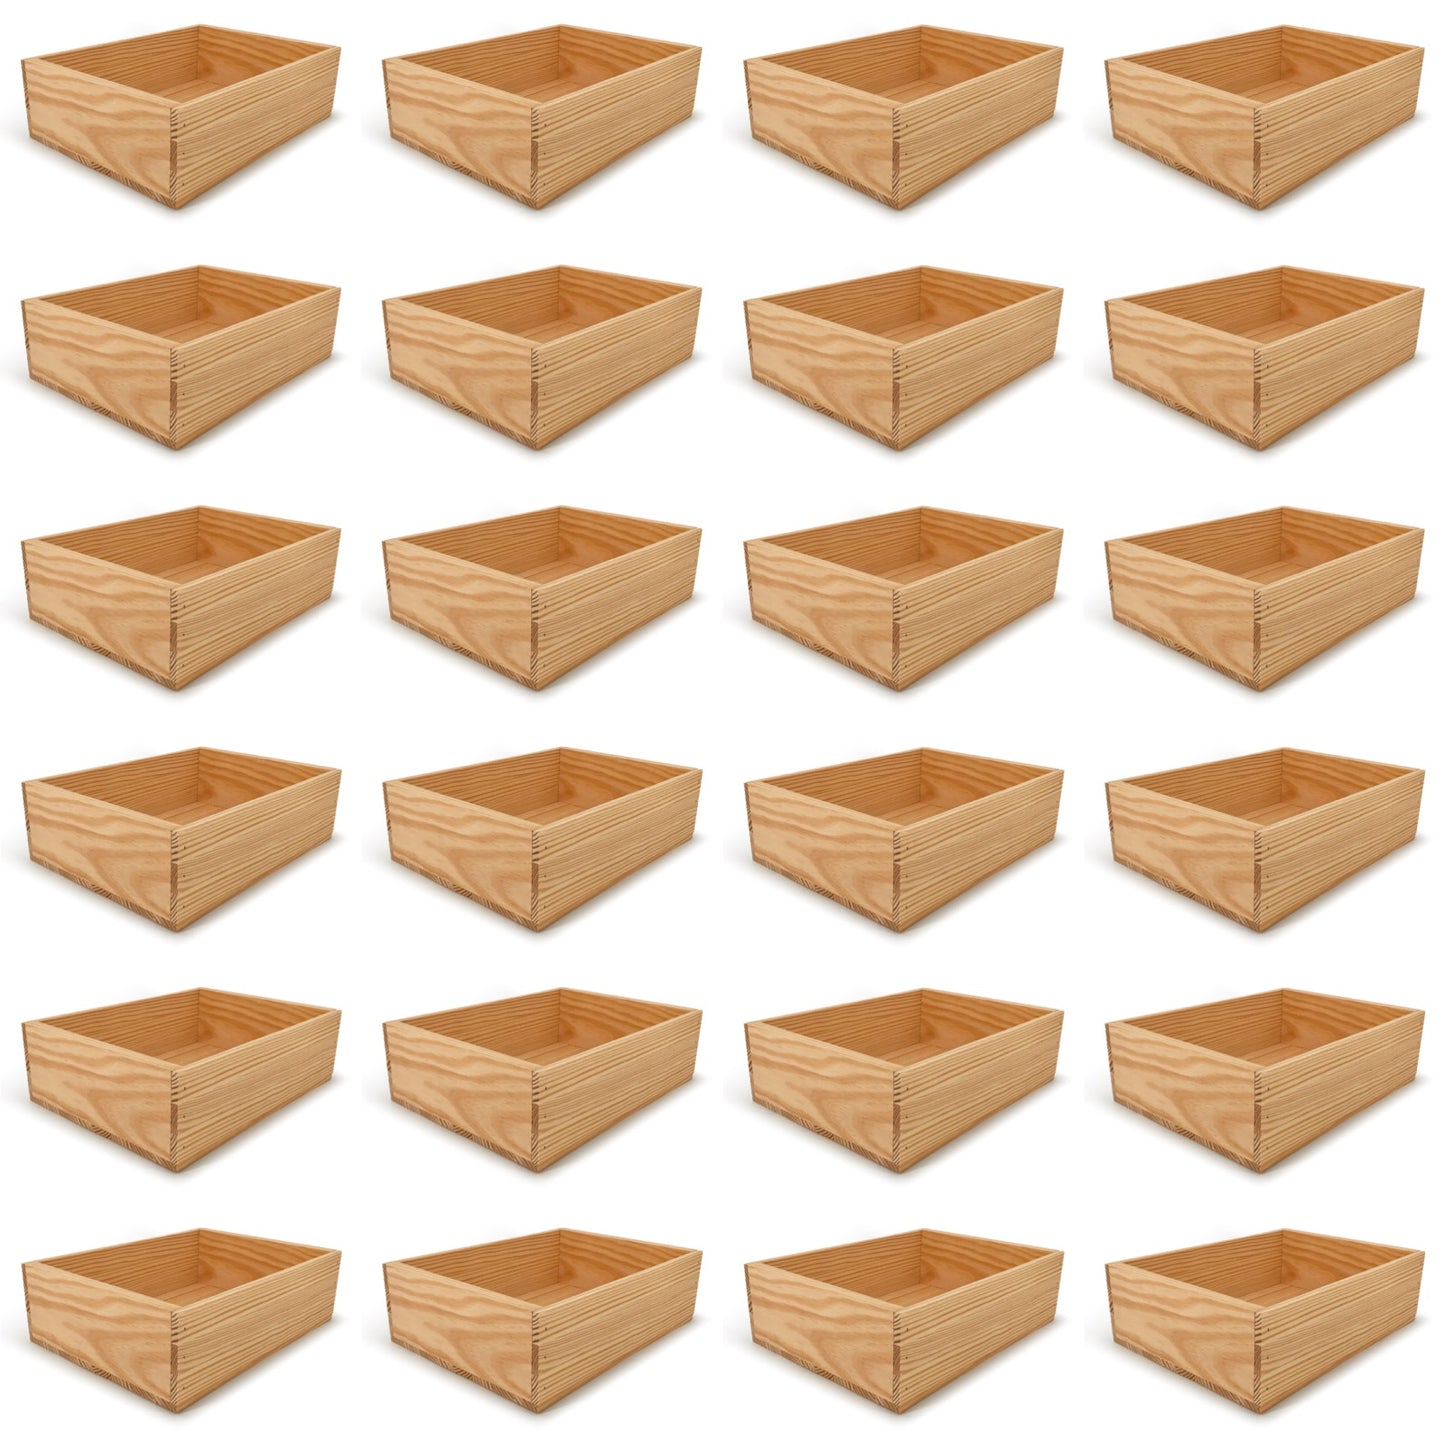 24 Small wooden crates 14x10x4.25